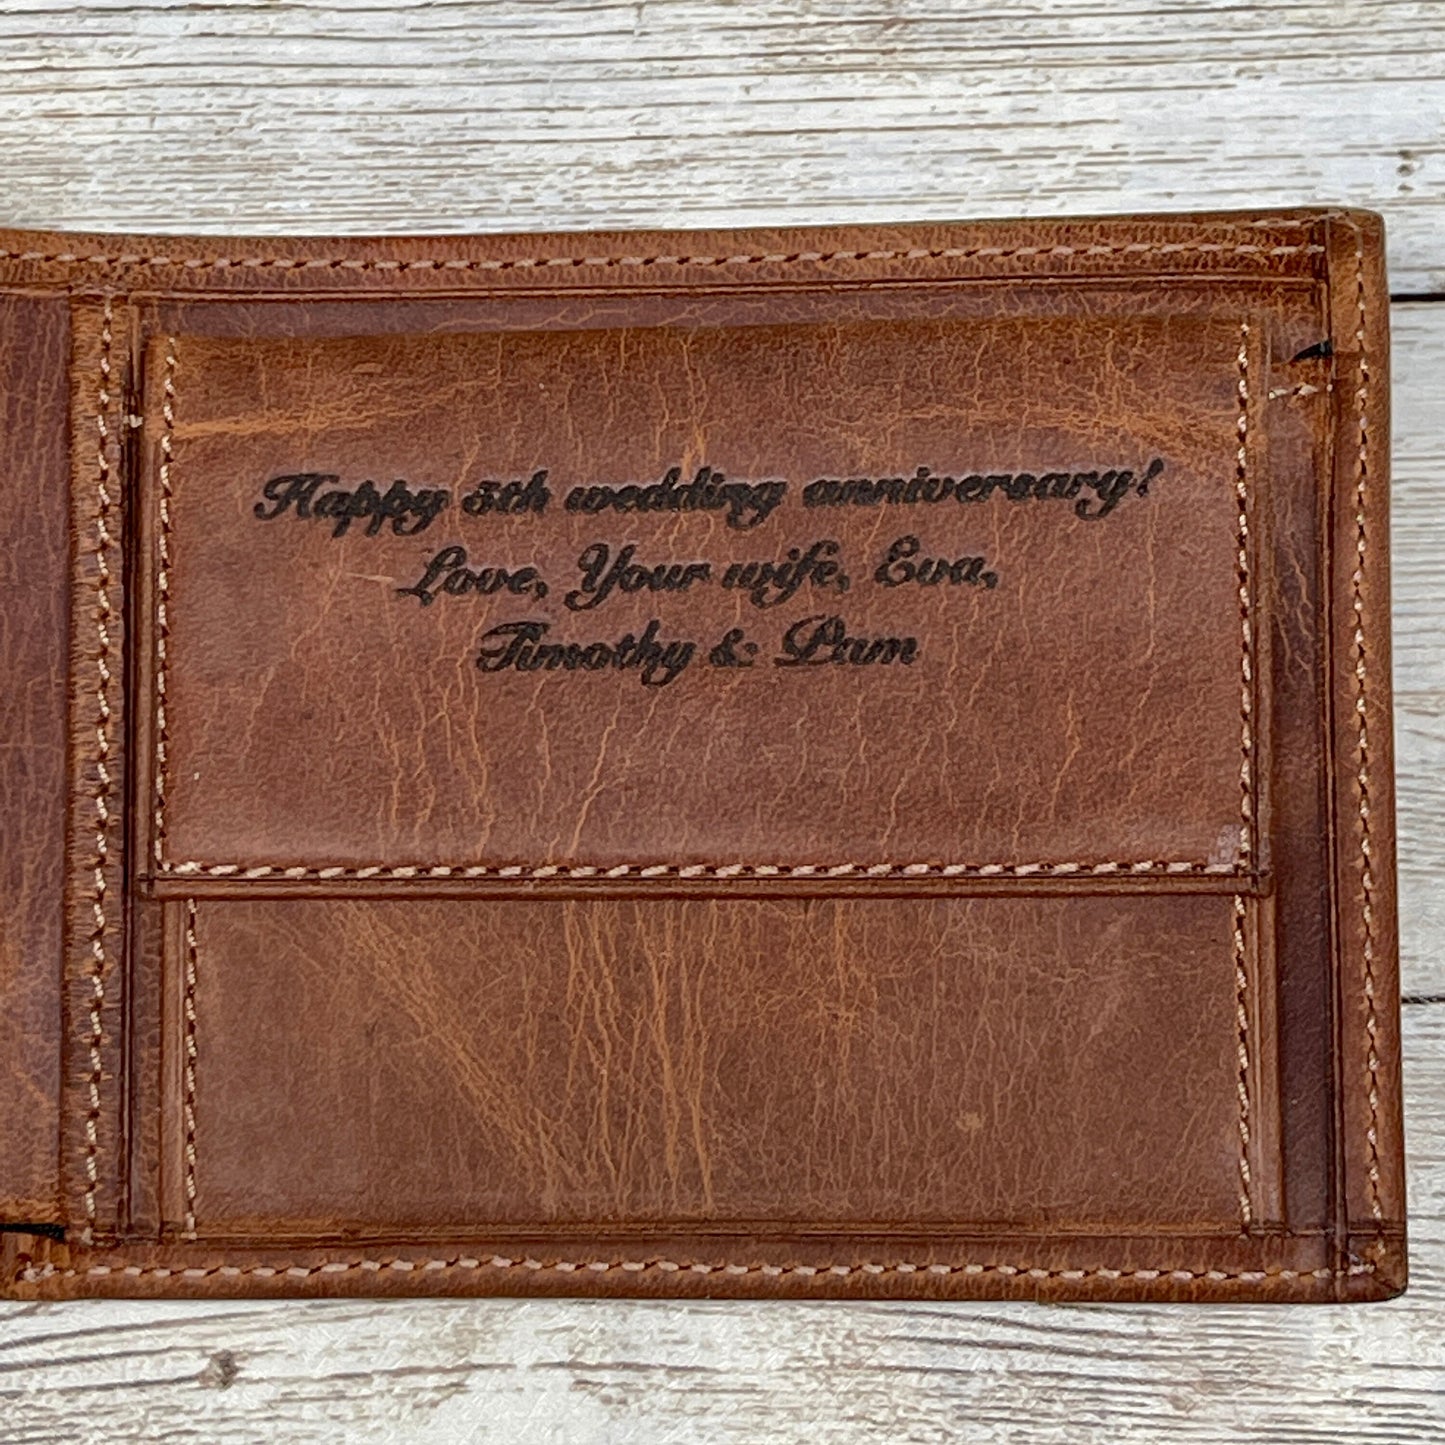 Personalized Monogrammed Engraved Genuine Leather Bifold Mens Wallet with Gift Box Groomsmen, Best Man, Father's Day Gift